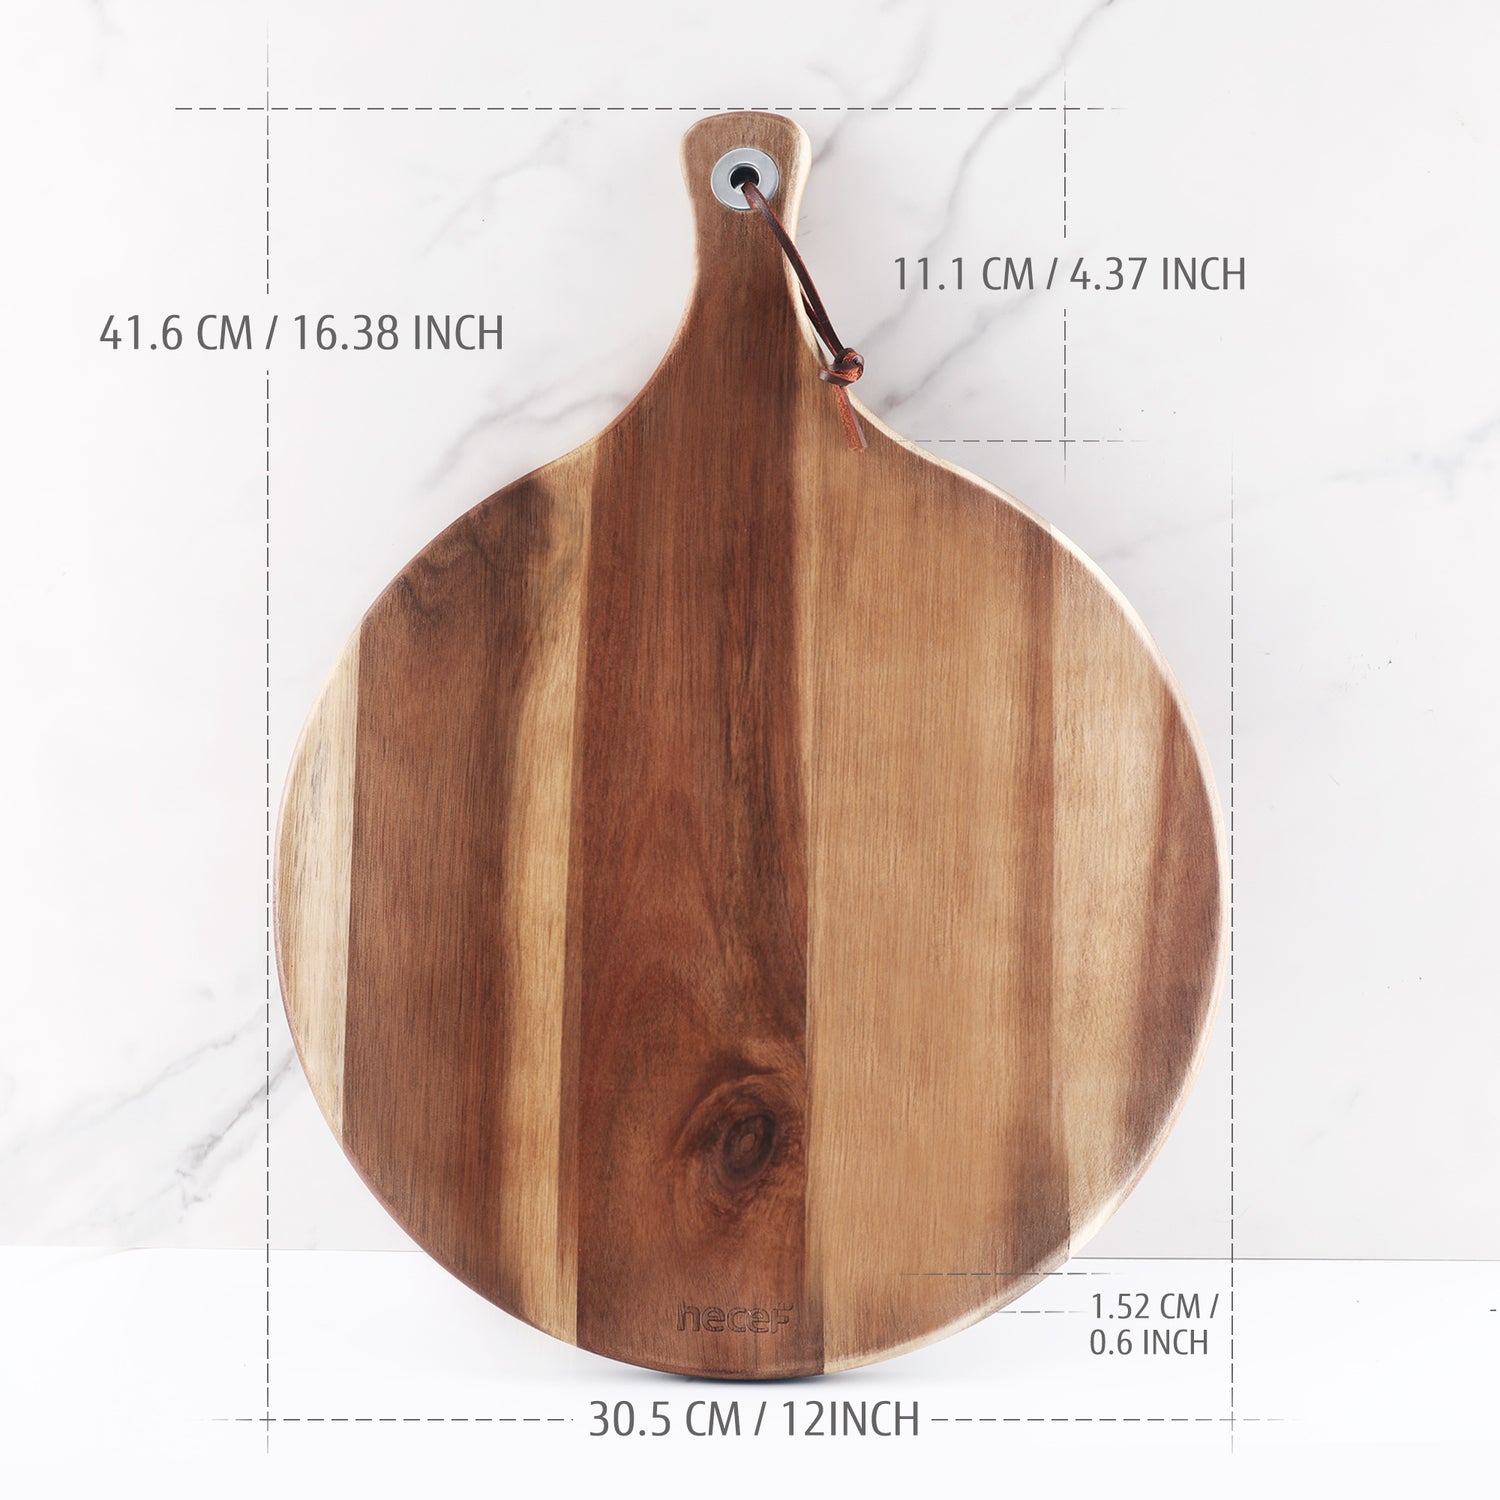 Hecef 12 Inch Large Cheese Board Premium Acacia Wood Charcuterie Board, Round Cheese Platter Cutting Board with Paddle Handle for Pizza Fruits Vegetables Bread, Food Serving Tray Gift Set for Kitchen - Hecef Kitchen